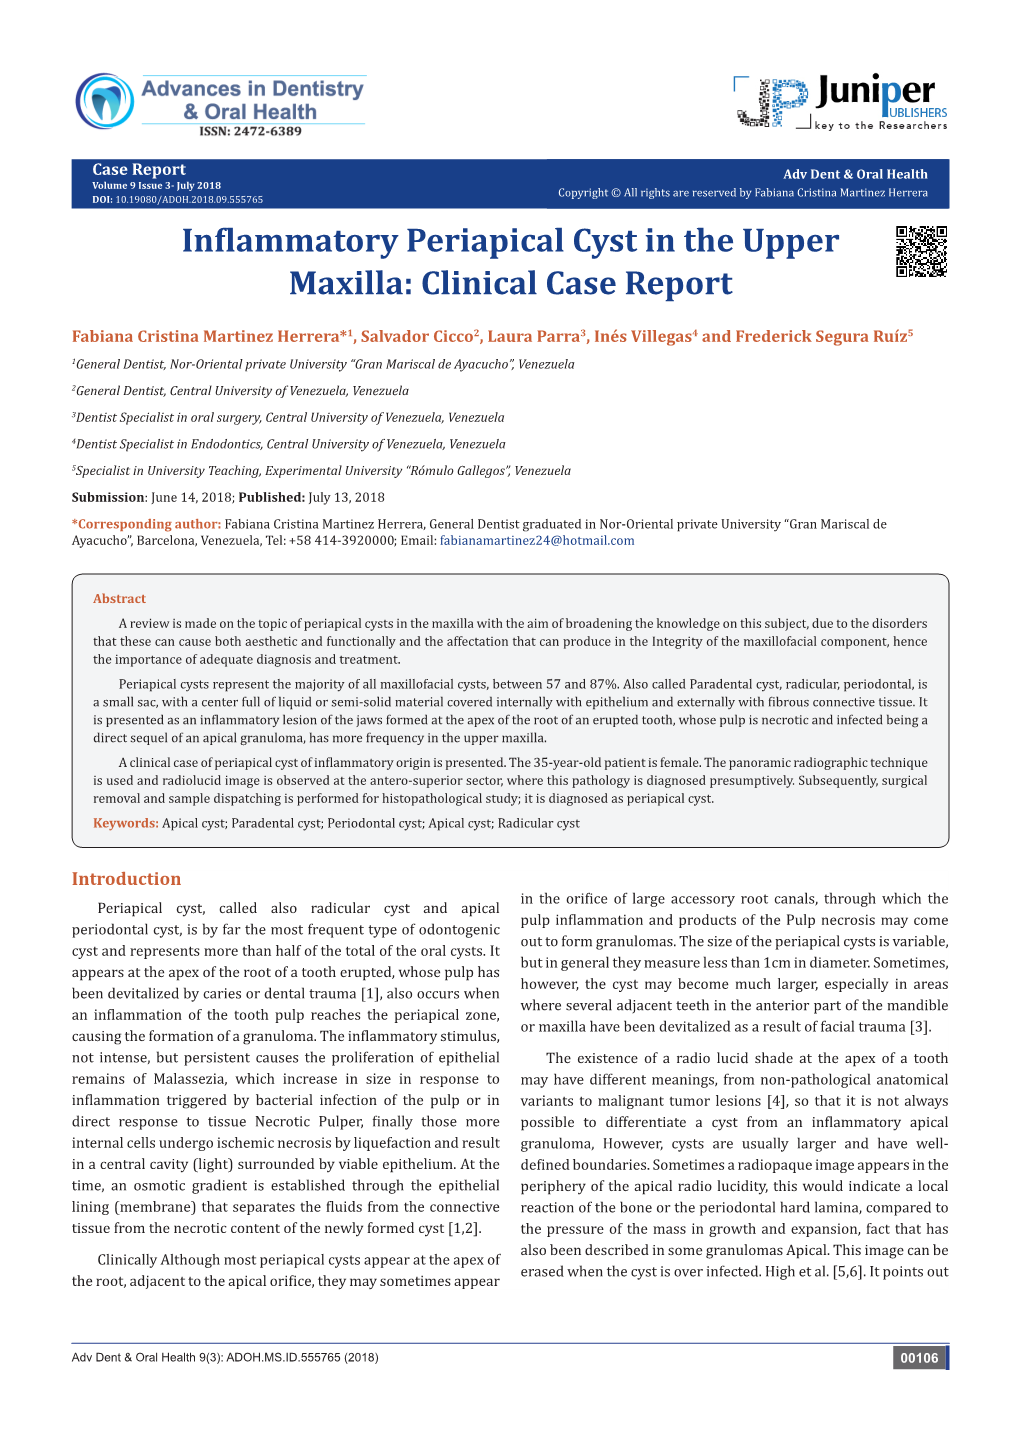 Inflammatory Periapical Cyst in the Upper Maxilla: Clinical Case Report